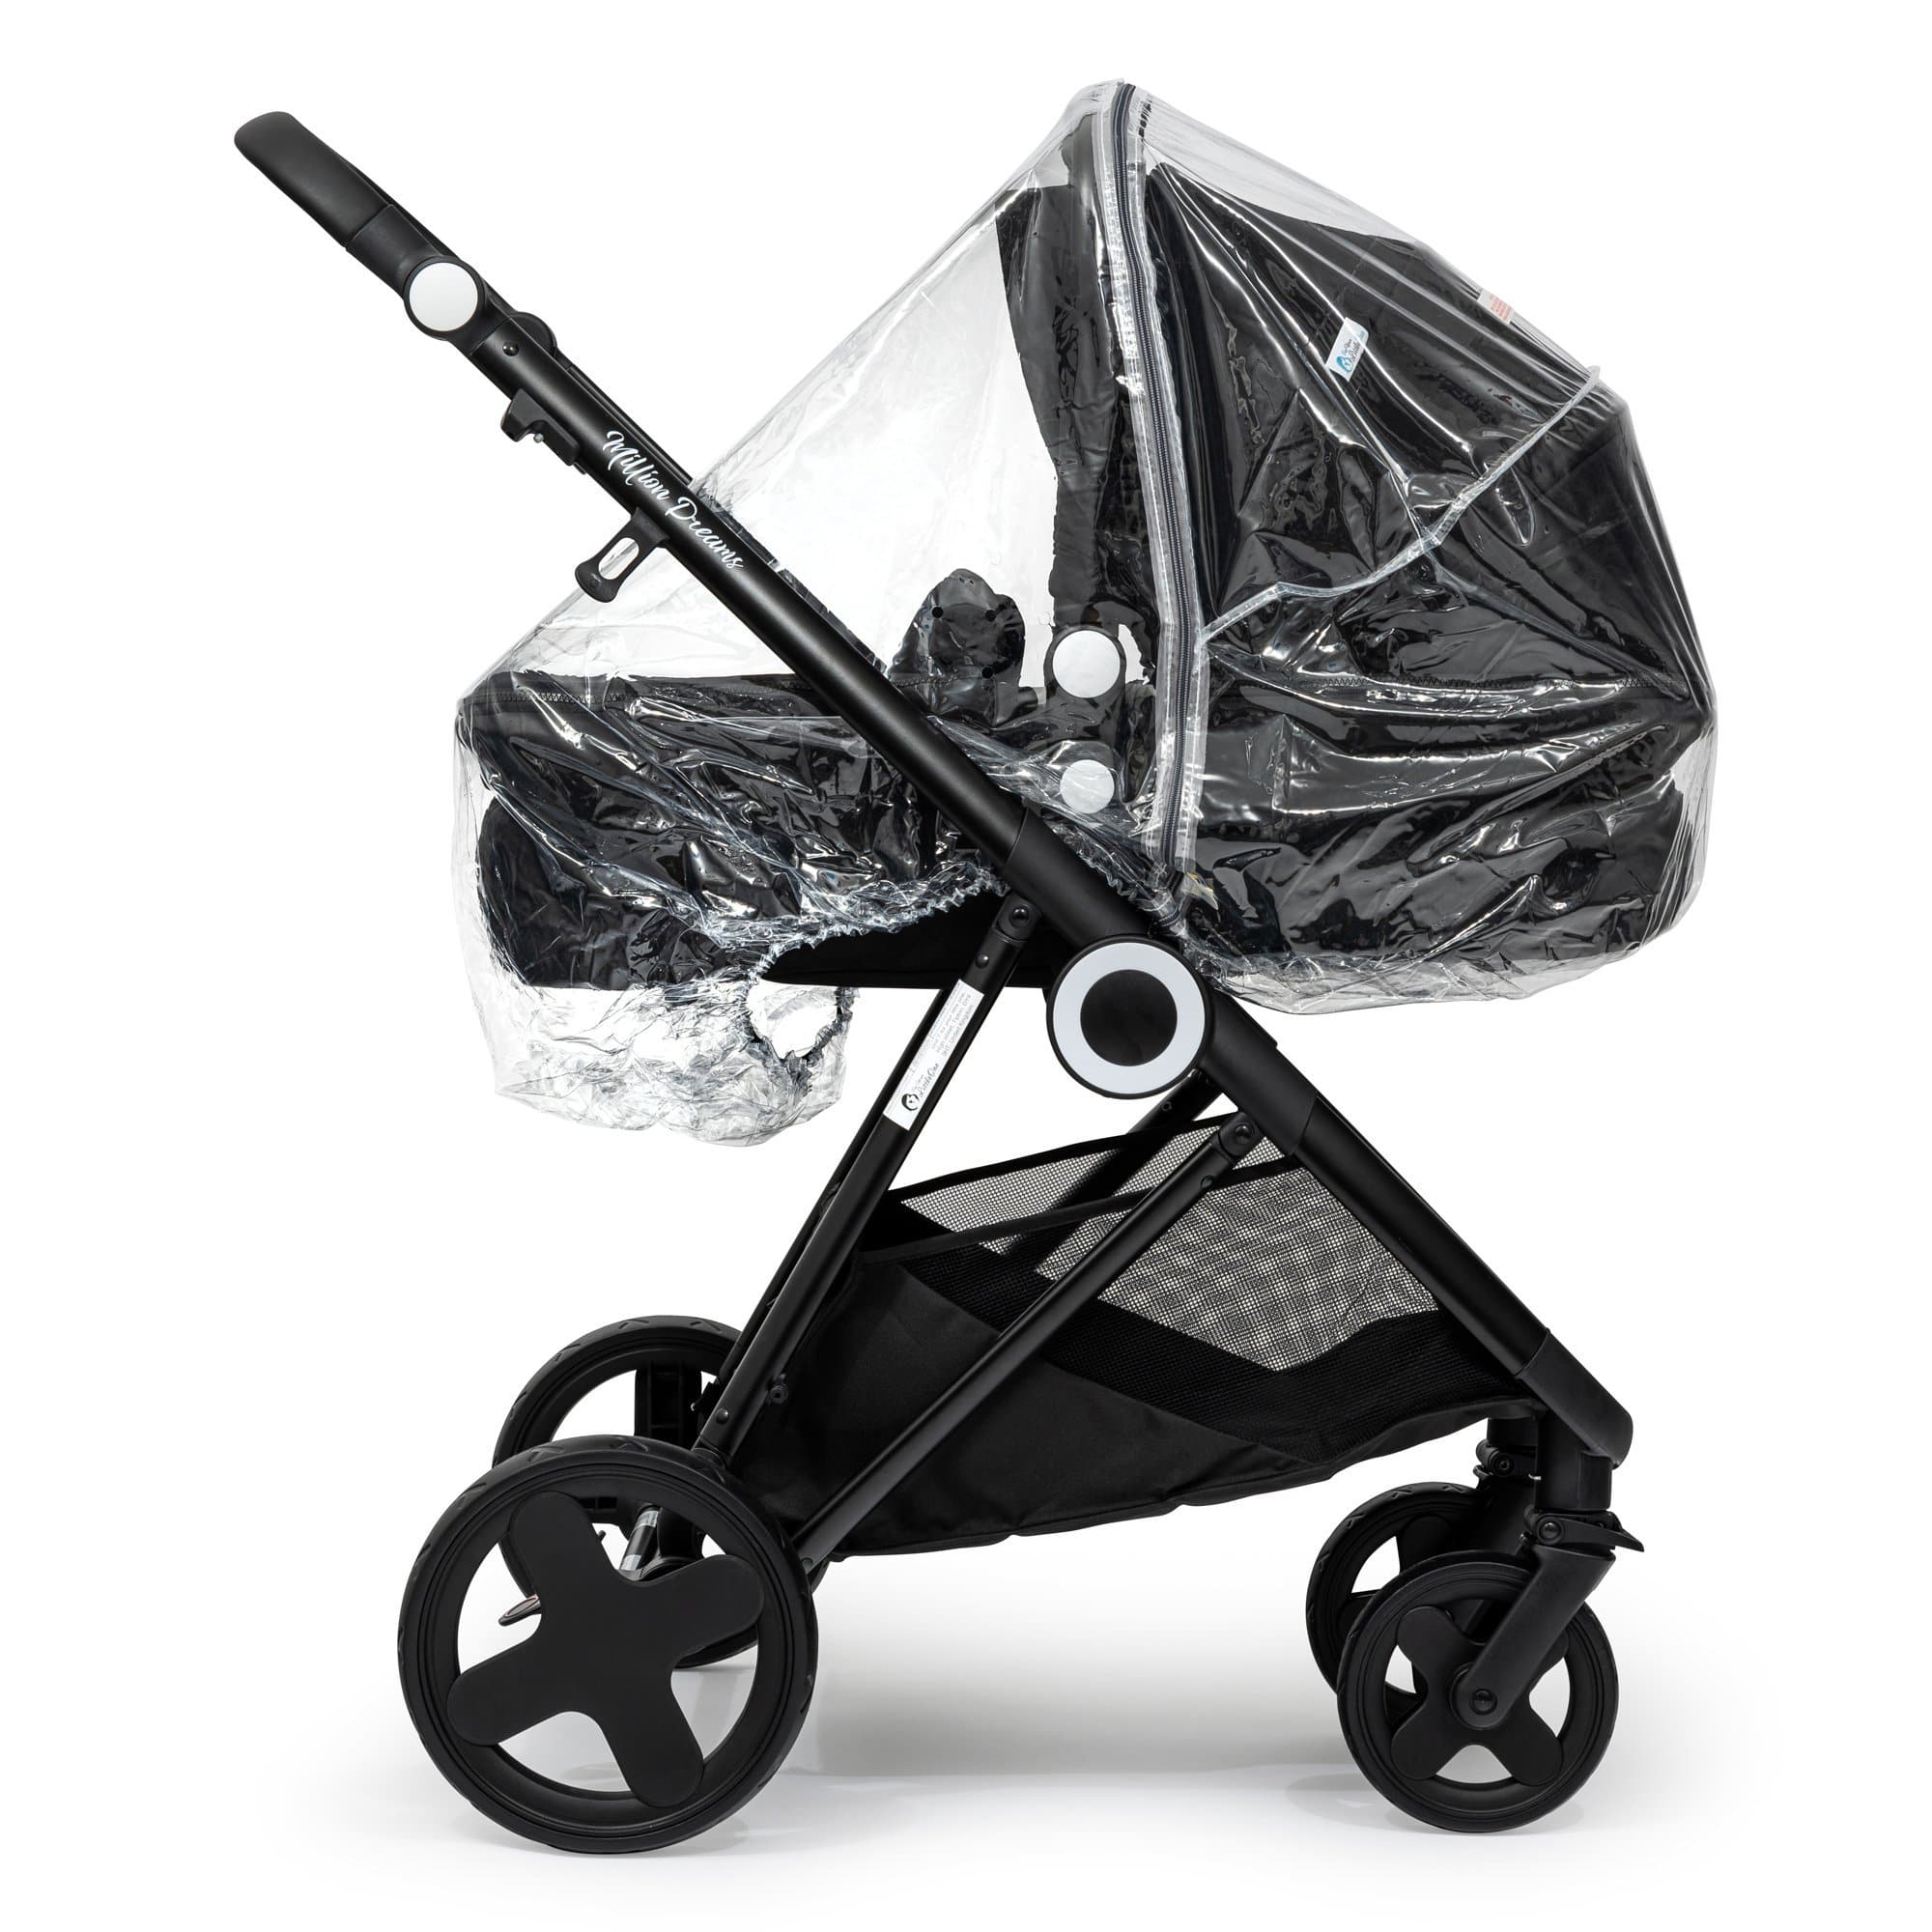 2 in 1 Rain Cover Compatible with Jane - Fits All Models - For Your Little One